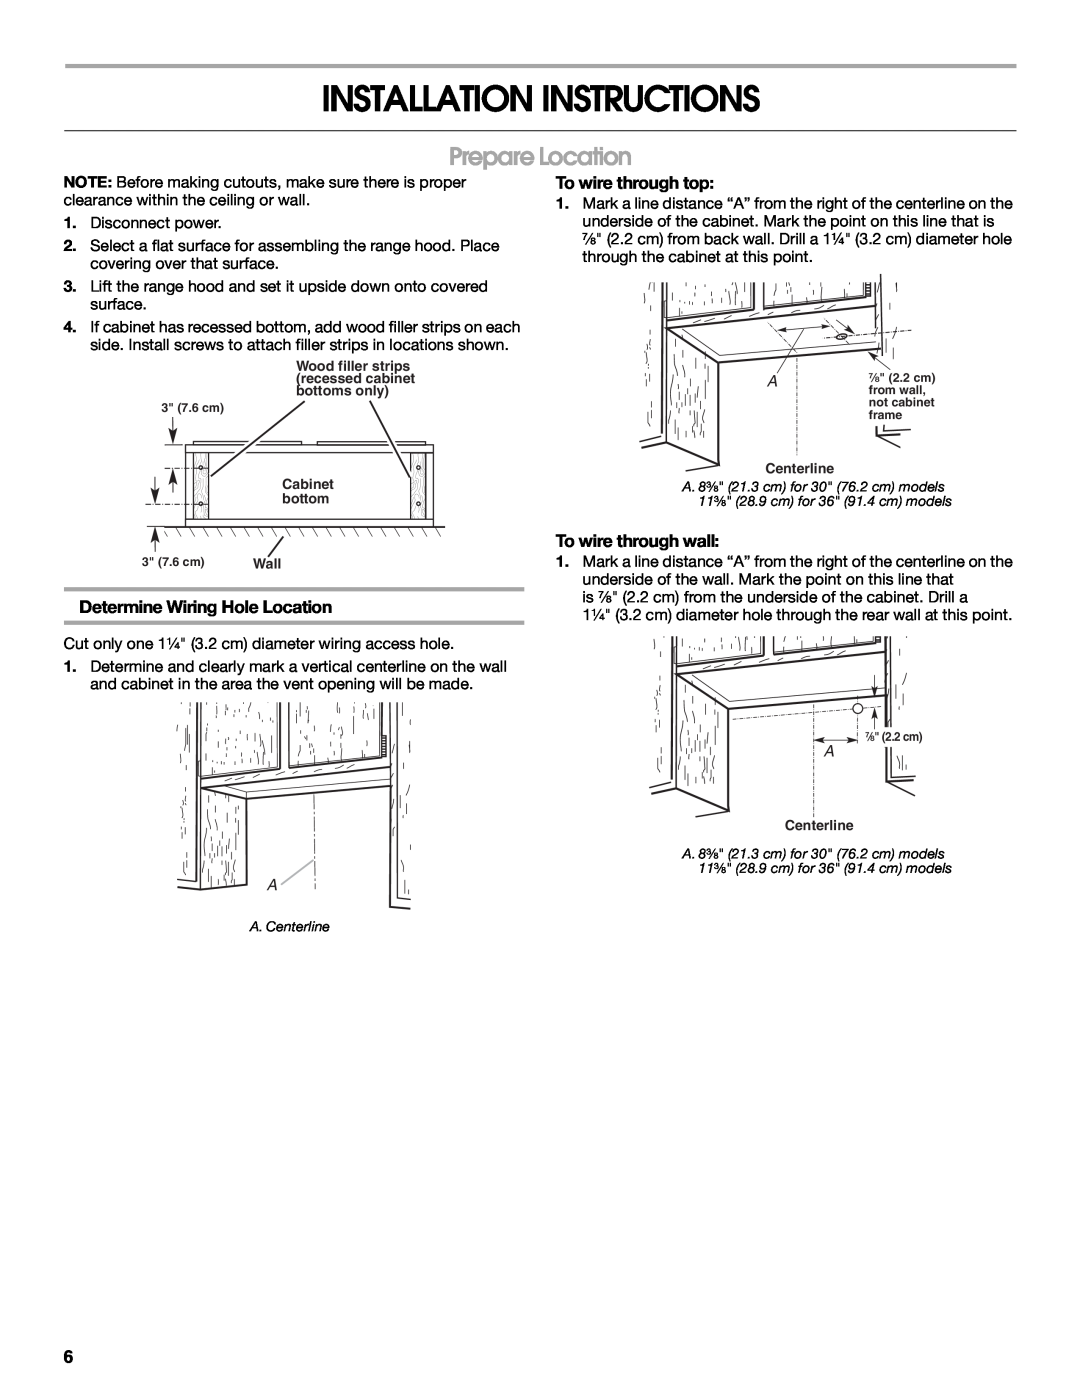 Whirlpool UXT4030AY Installation Instructions, Prepare Location, Determine Wiring Hole Location, To wire through top 